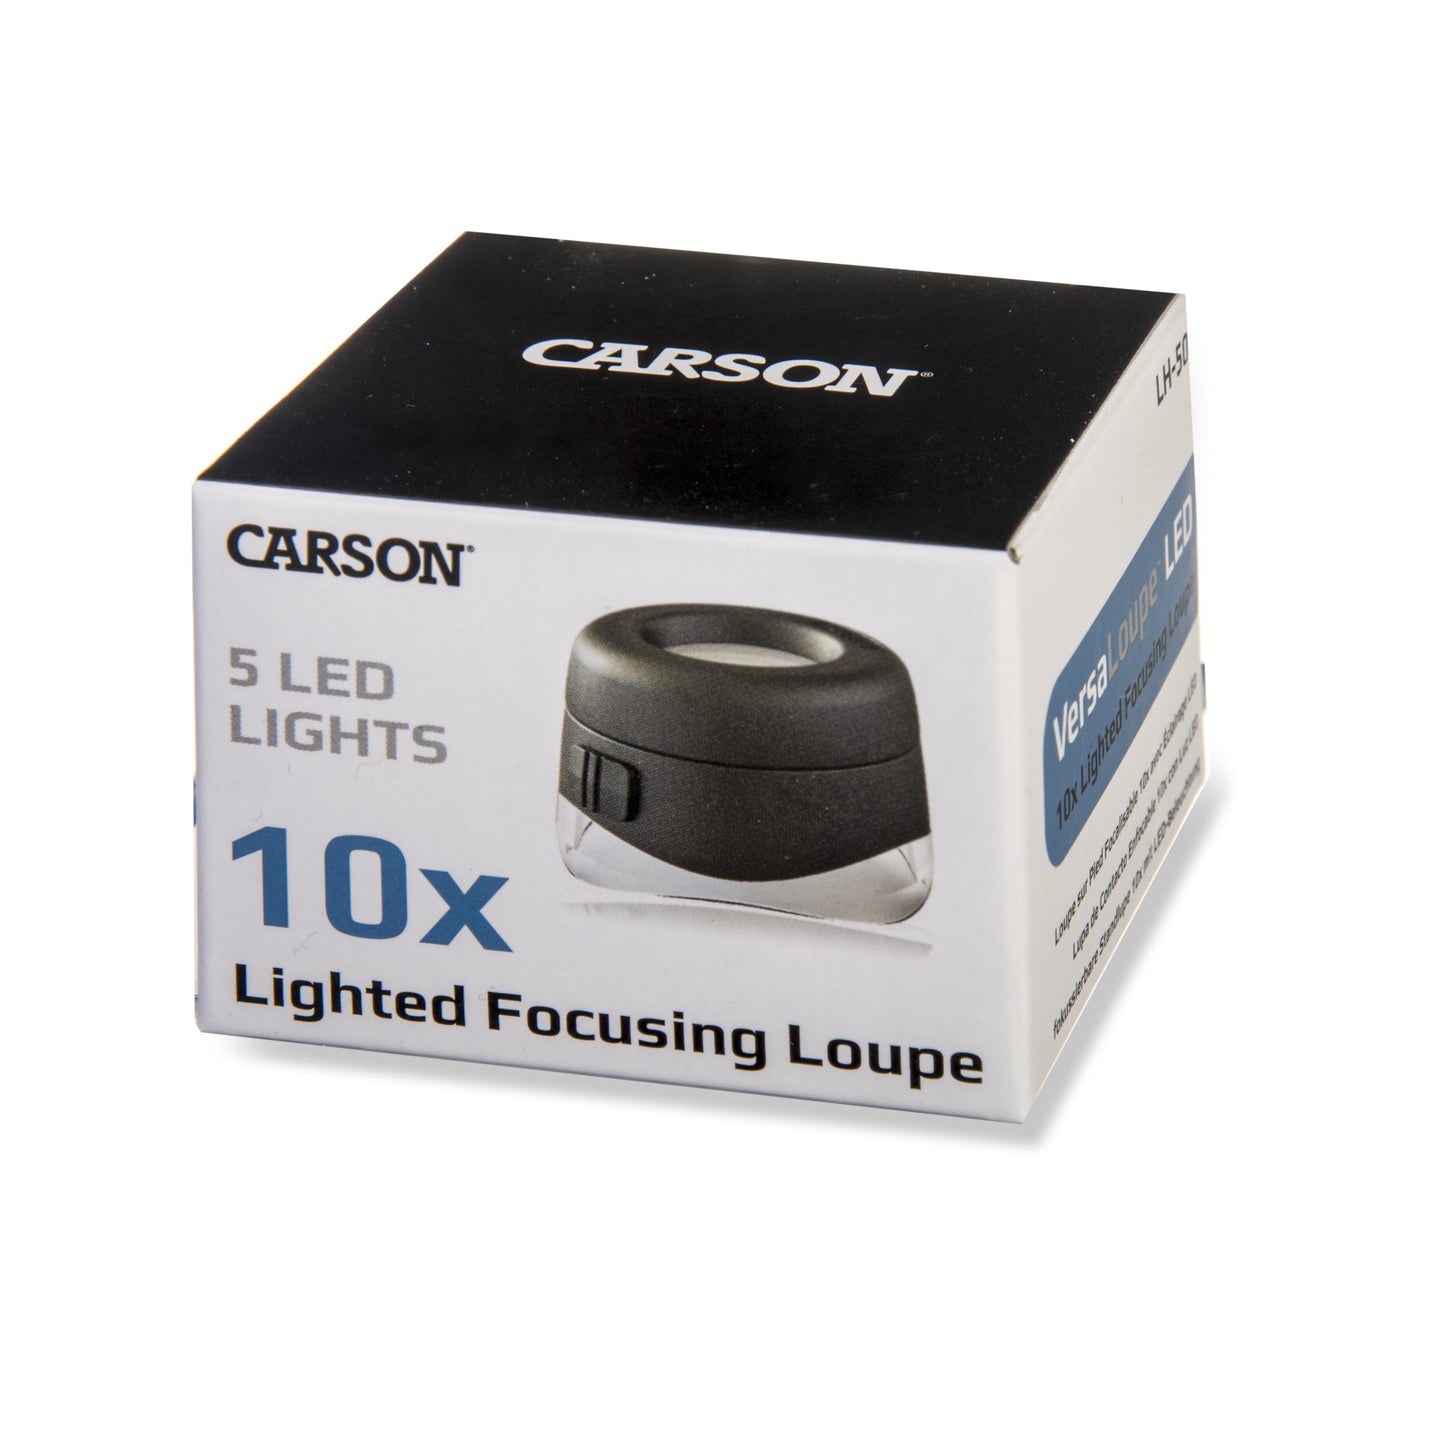 Carson LED VersaLoupe™ 10x LED Lighted Focusing Loupe Magnifier LH-50